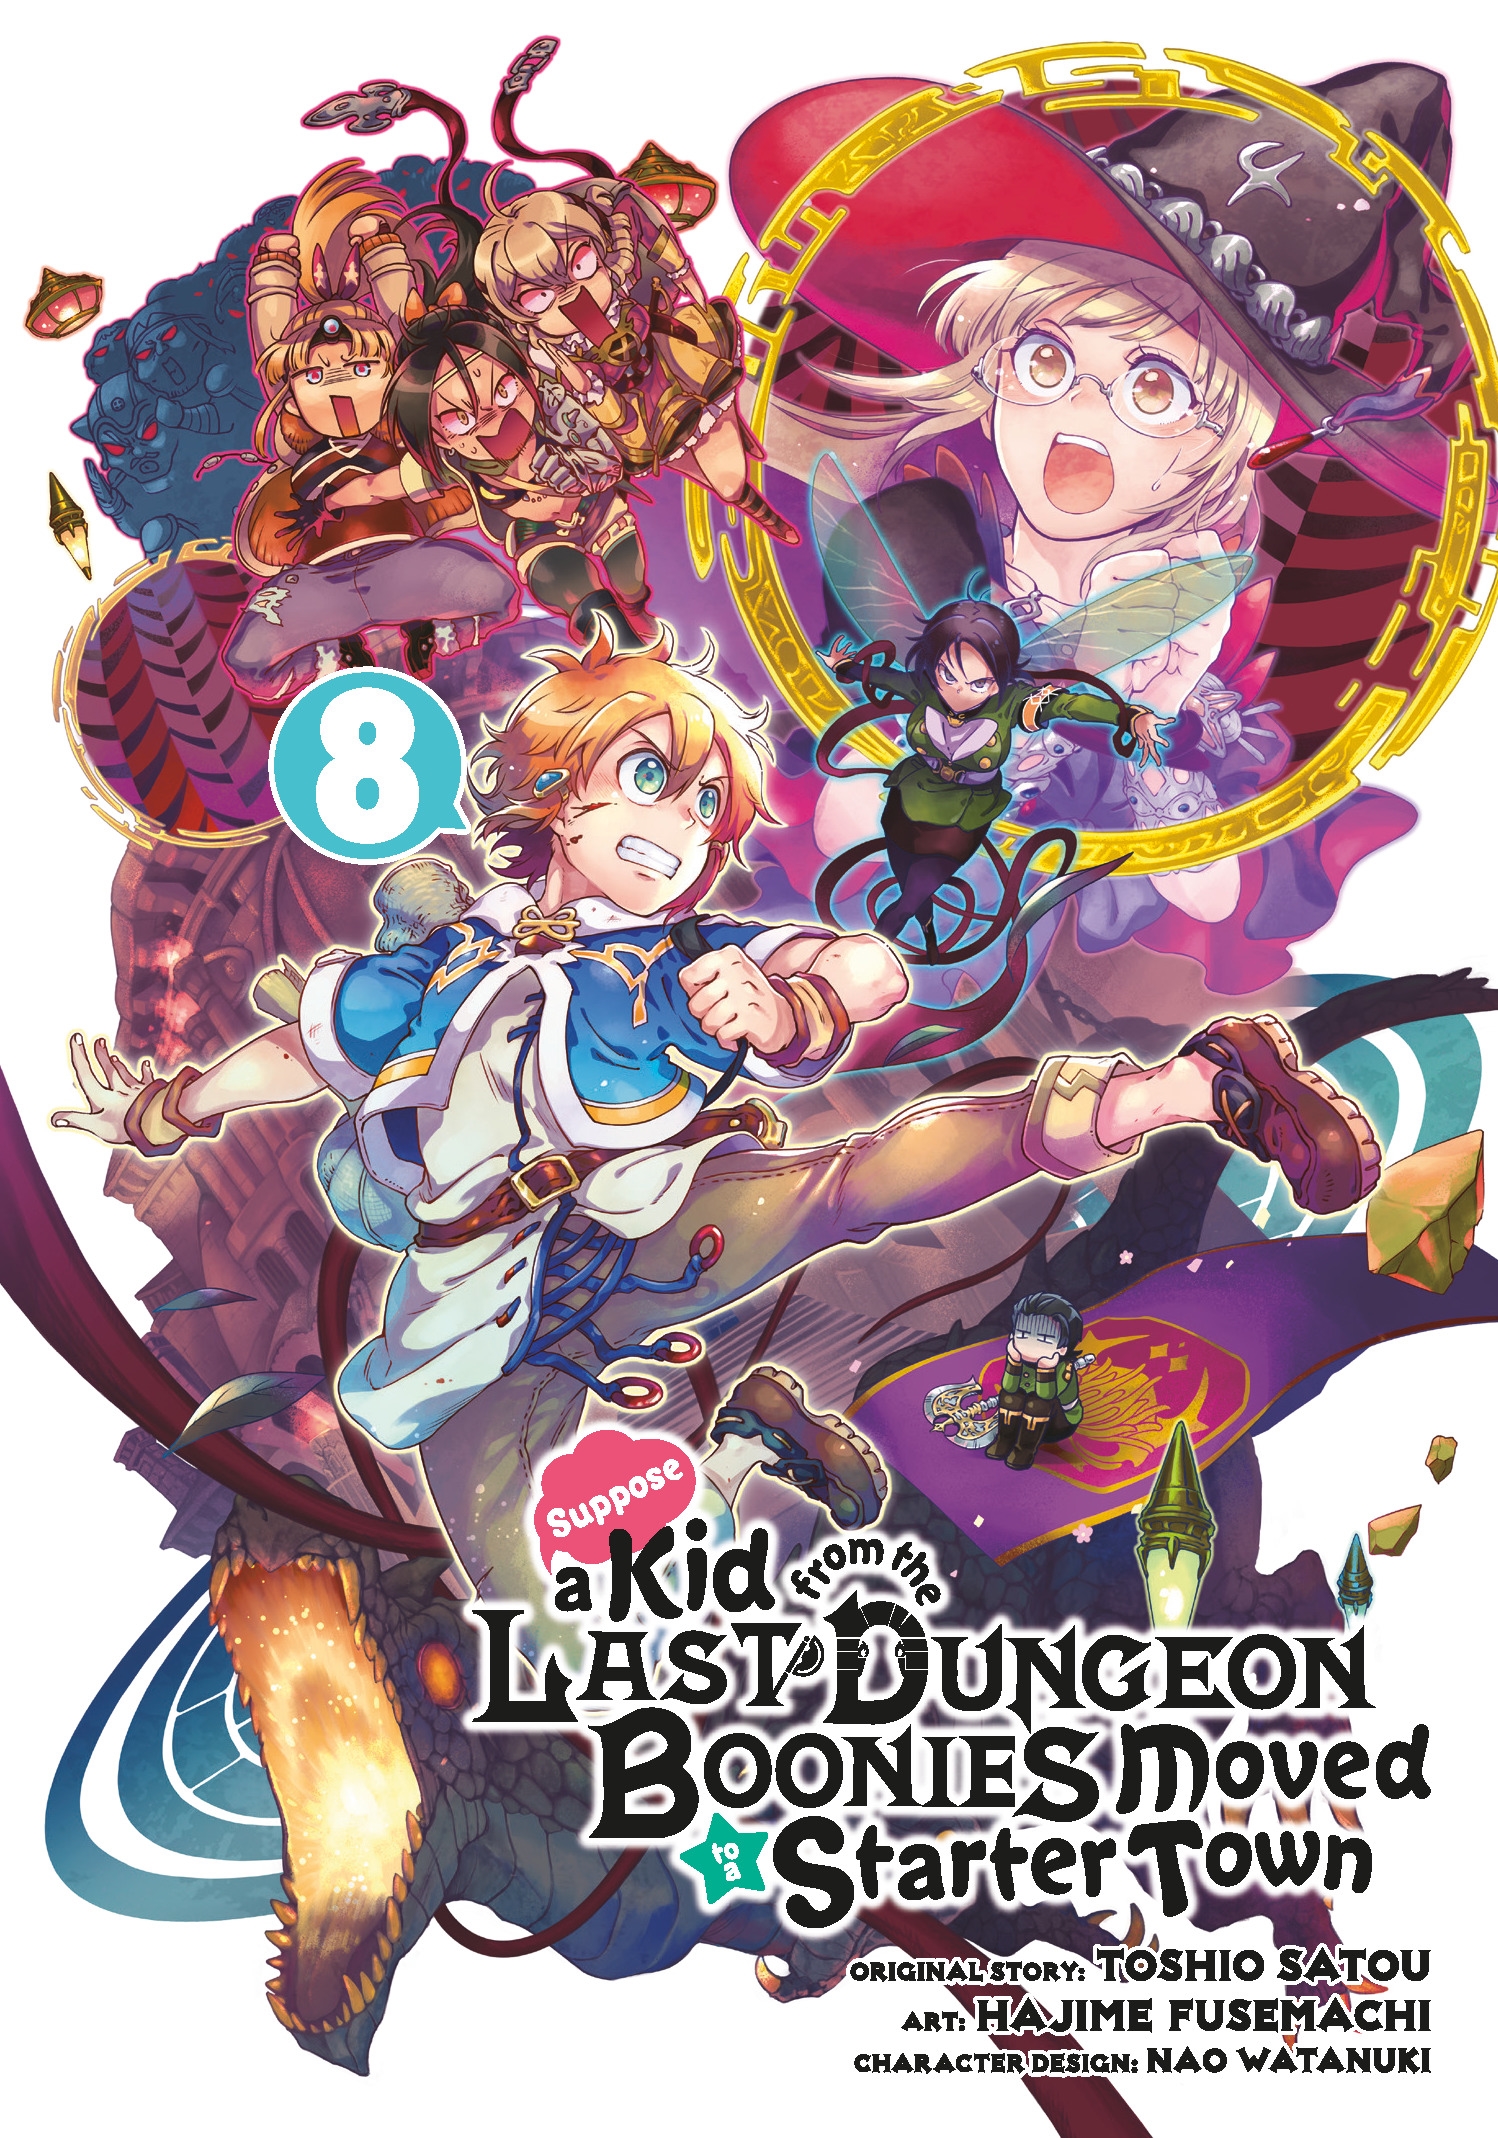 NBCU Japan Reveals 3rd 'Suppose a Kid From the Last Dungeon Boonies Moved  to a Starter Town' Anime Blu-ray Release Artwork